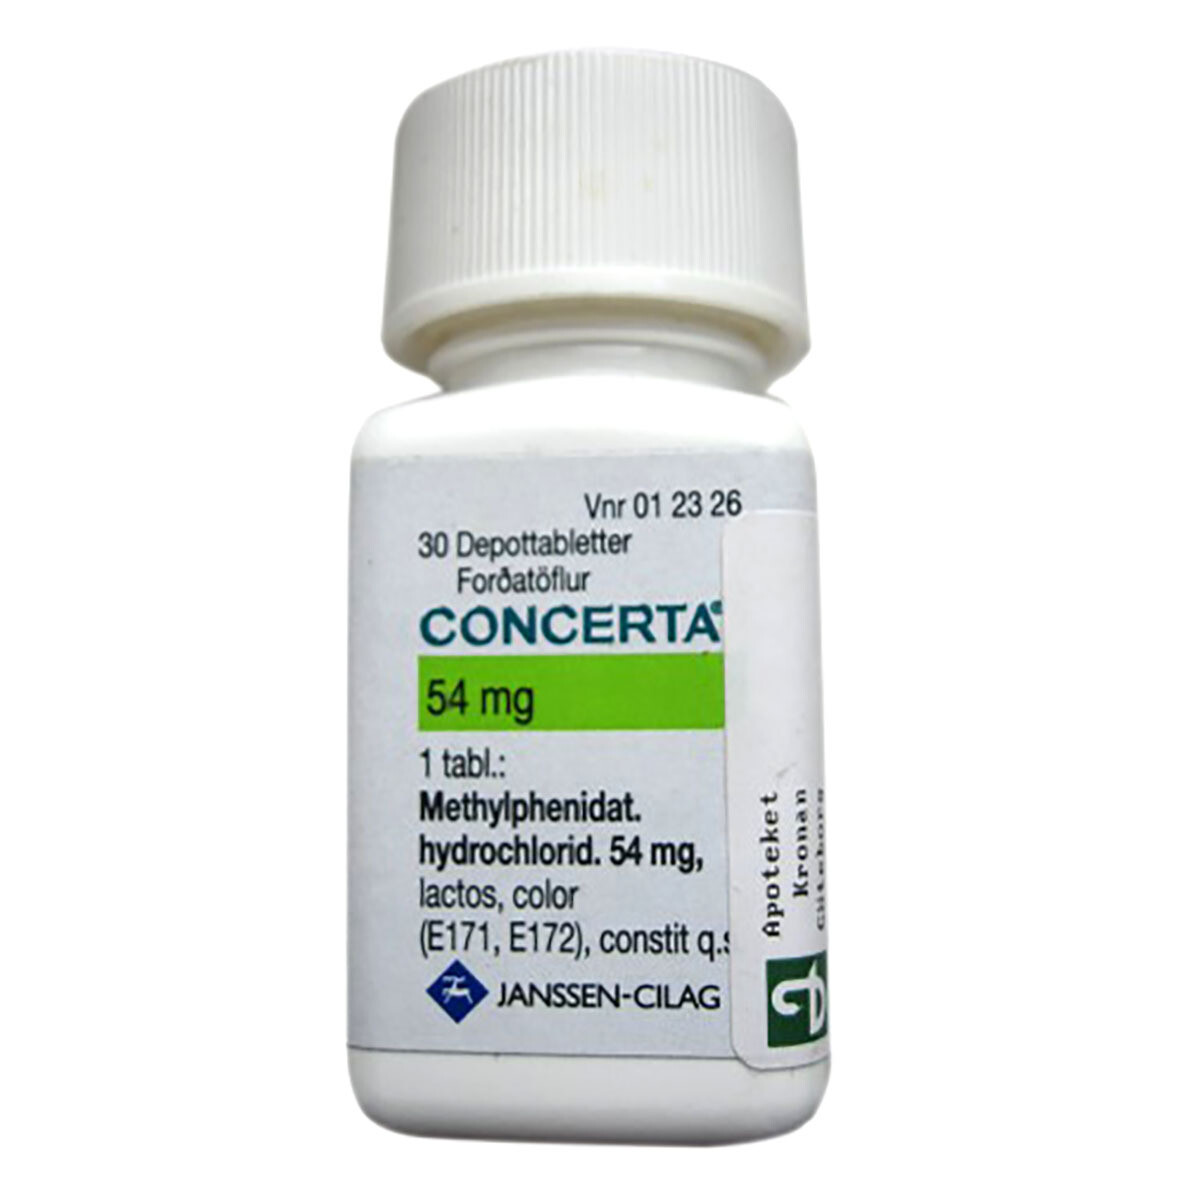 Concerta Drug For Attention Deficit Hyperactivity Disorder 